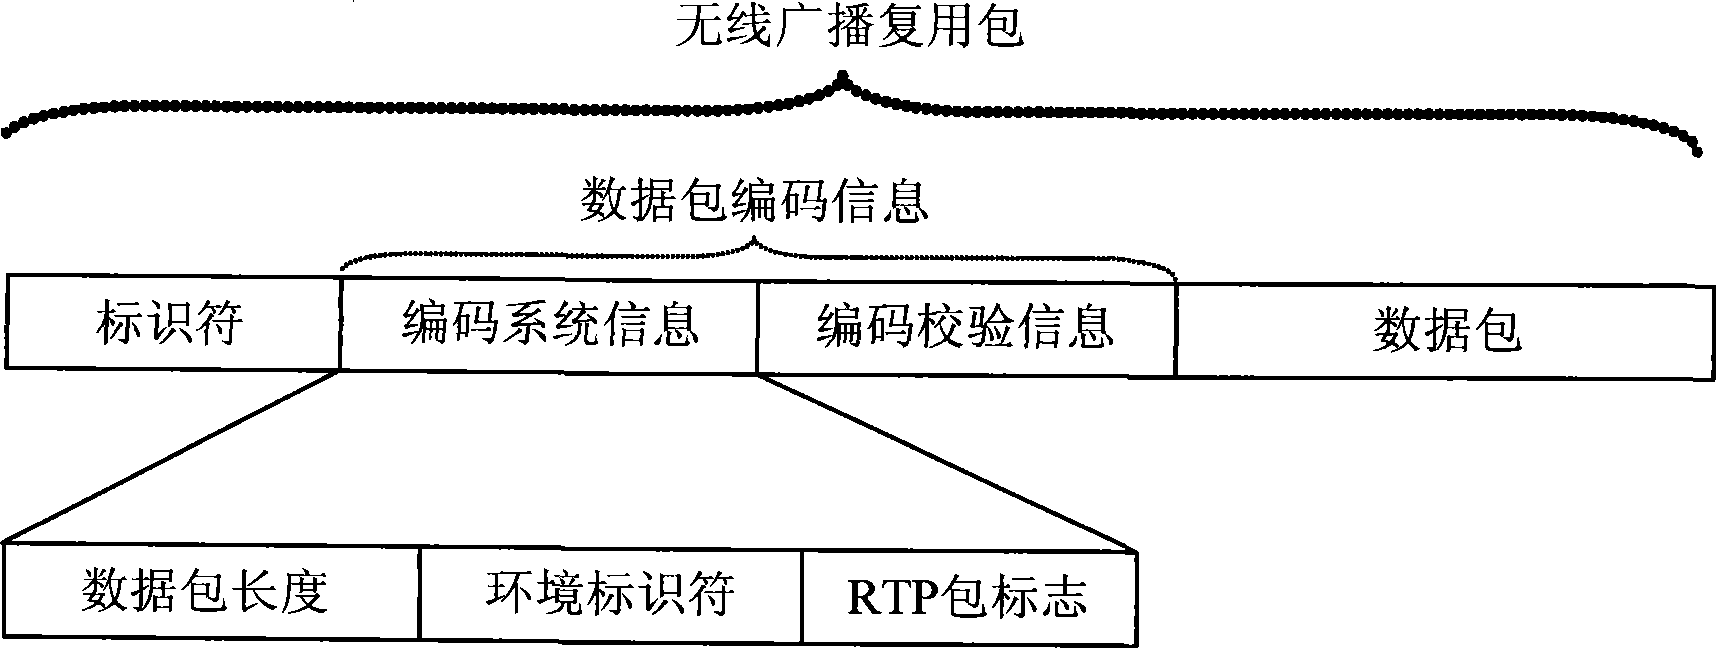 Data packet packing, transmitting and receiving method for mobile multimedia broadcast system